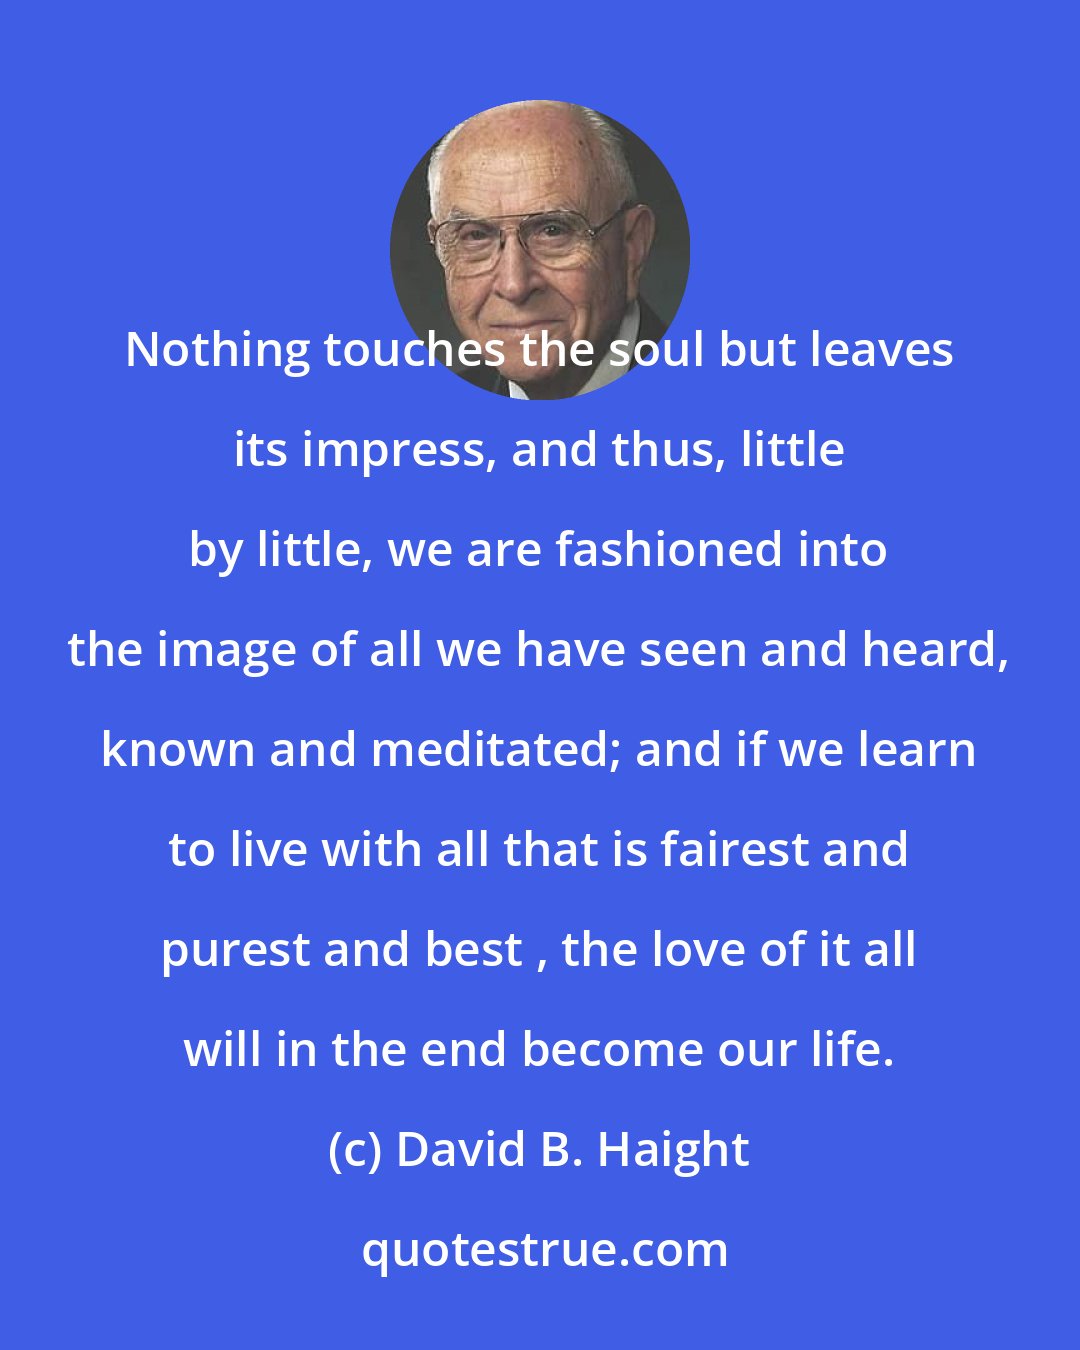 David B. Haight: Nothing touches the soul but leaves its impress, and thus, little by little, we are fashioned into the image of all we have seen and heard, known and meditated; and if we learn to live with all that is fairest and purest and best , the love of it all will in the end become our life.